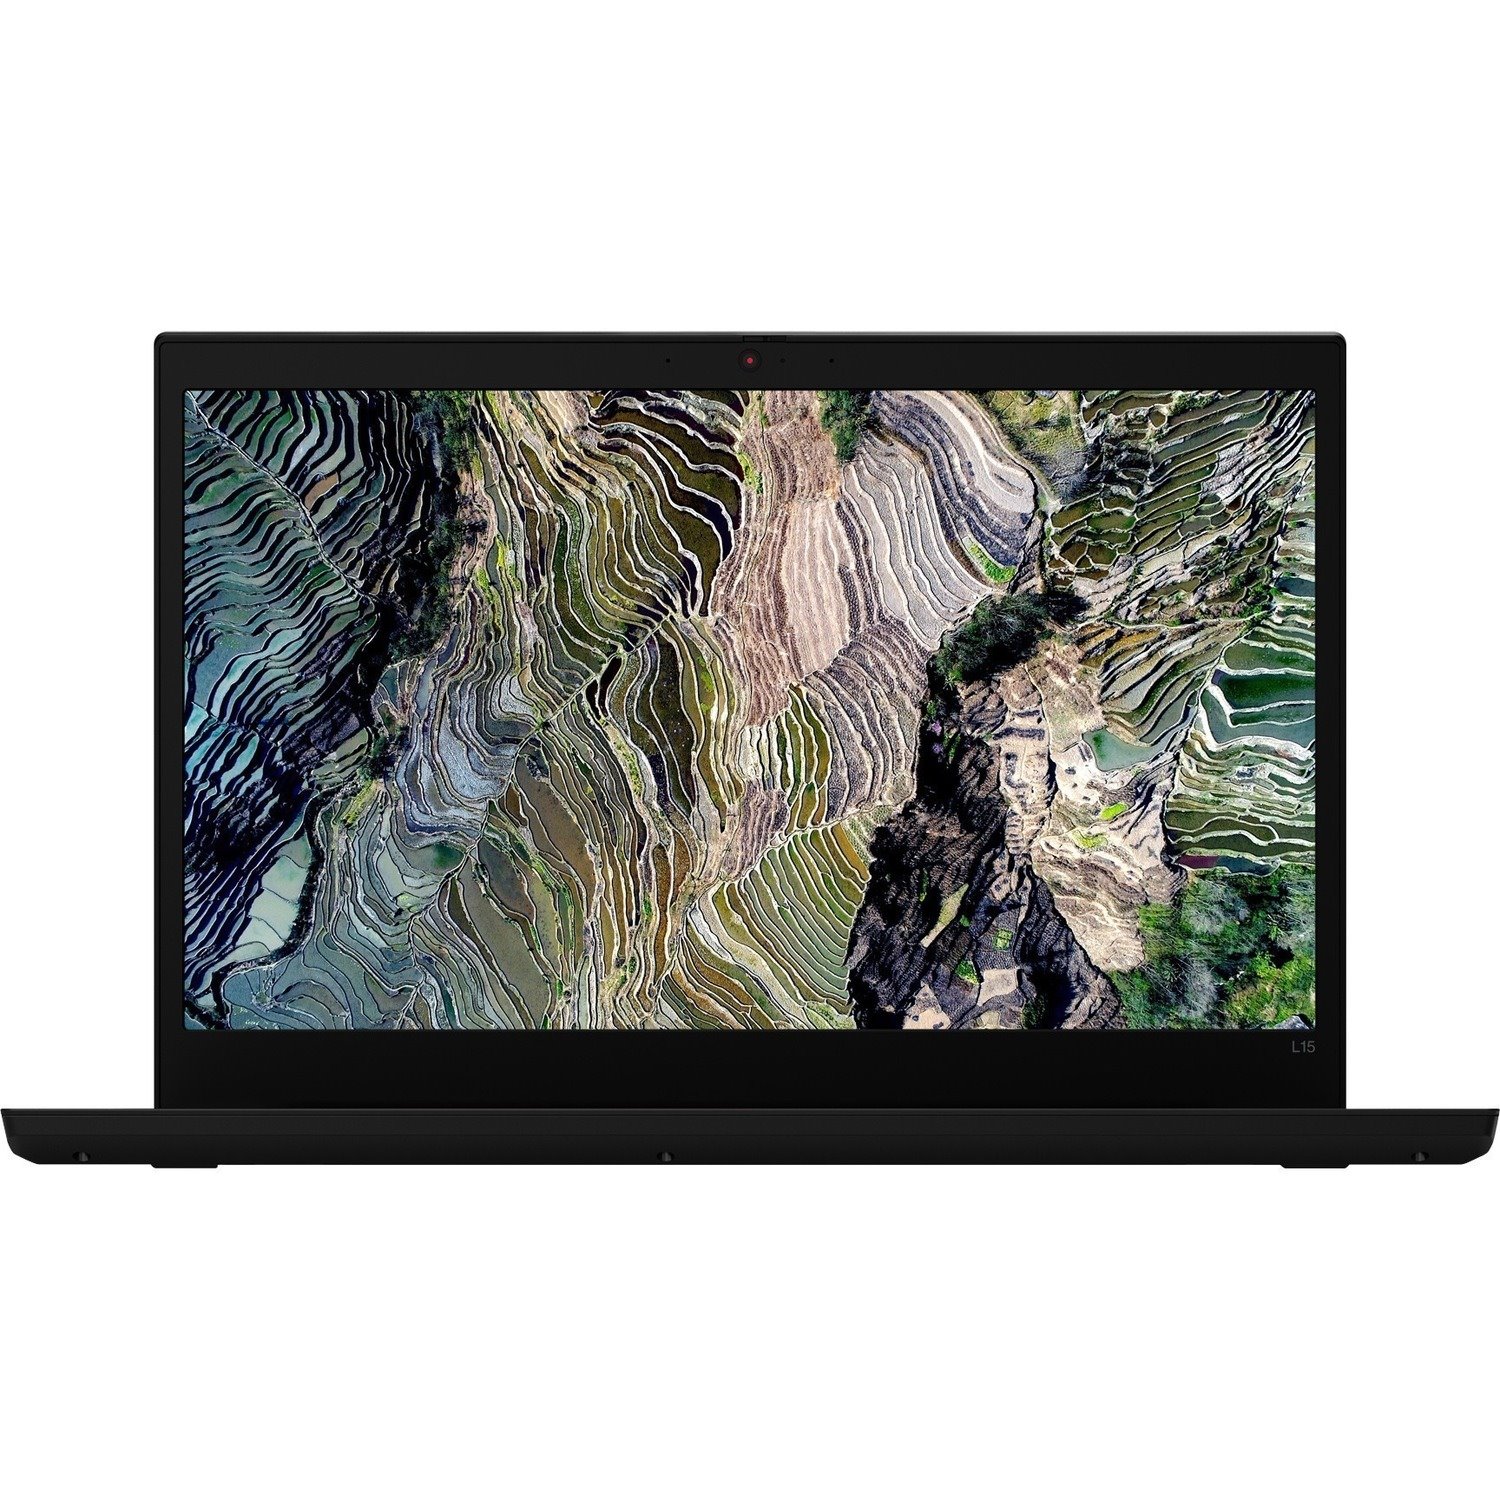 Lenovo ThinkPad L15 Gen2 20X300K9US 15.6" Notebook - Full HD - 1920 x 1080 - Intel Core i5 11th Gen i5-1135G7 Quad-core (4 Core) 2.4GHz - 8GB Total RAM - 256GB SSD - Black - no ethernet port - not compatible with mechanical docking stations, only supports cable docking